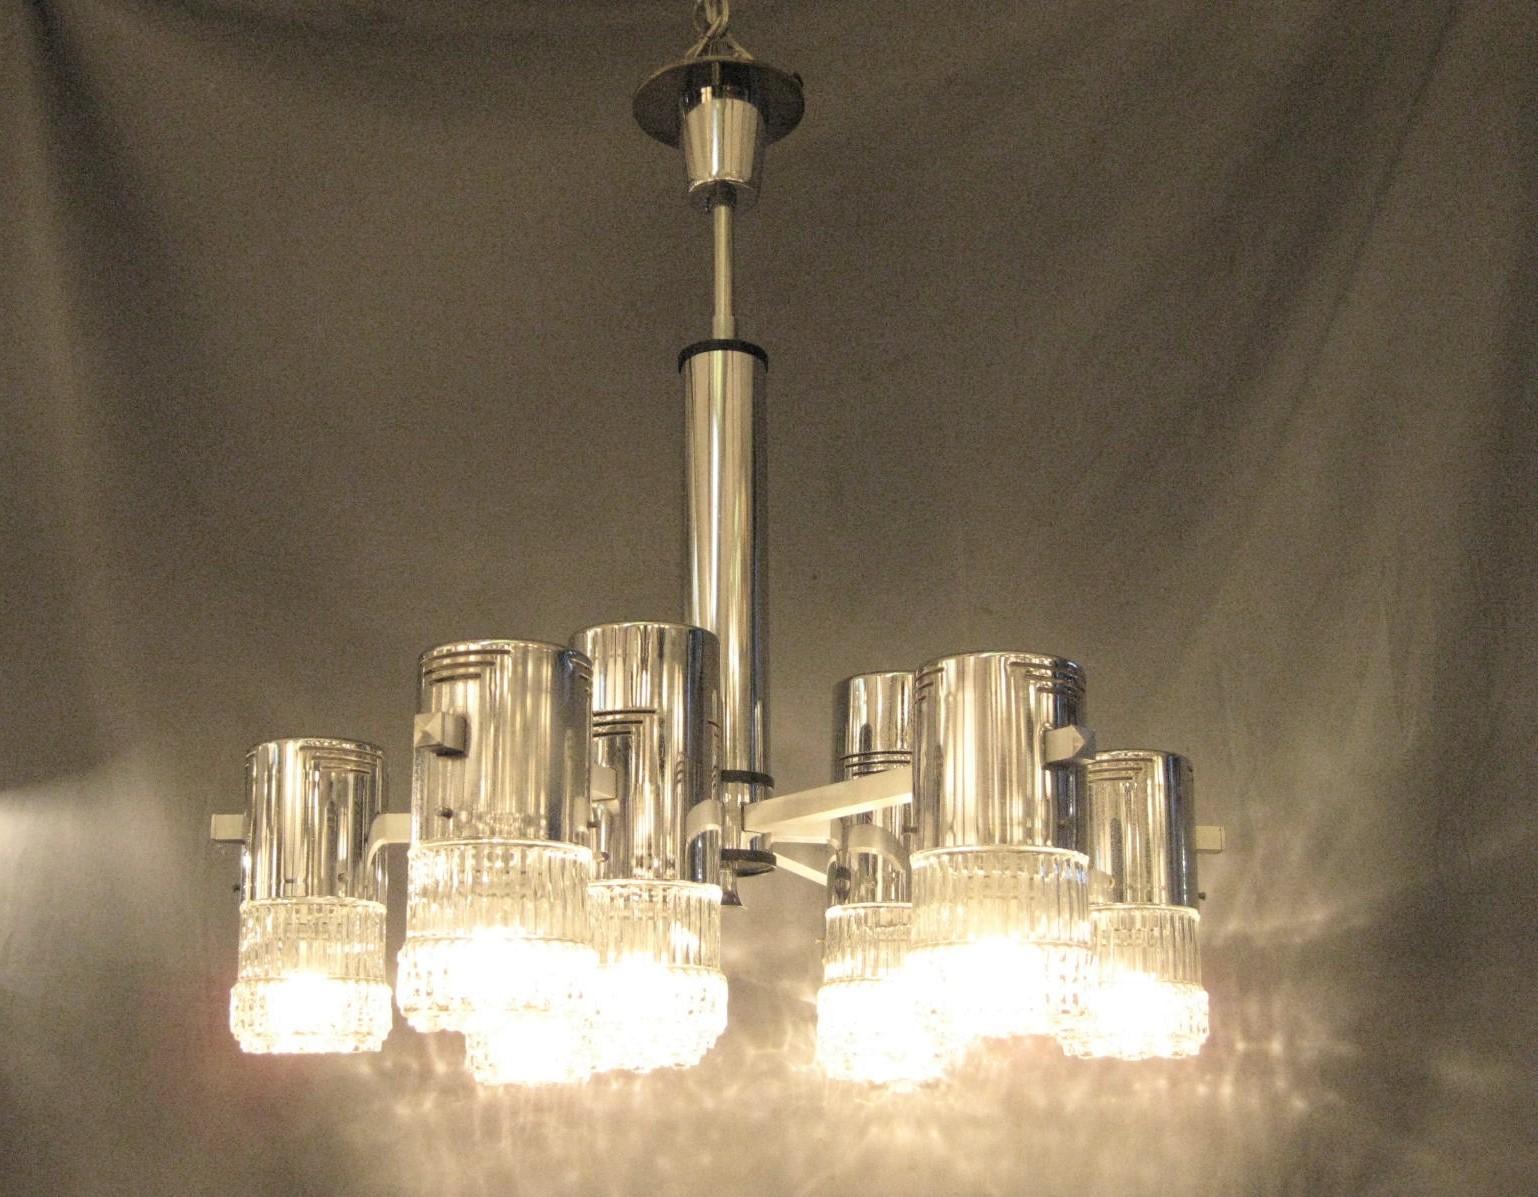 Italian Modernist chandelier of elemental architectural post and beam design. 
Chromium plated over bronze with crystalline pattern on glass and linear open work design on cylinders.
Attributed to Sciolari
Some light pitting to metalwork.
1960s,